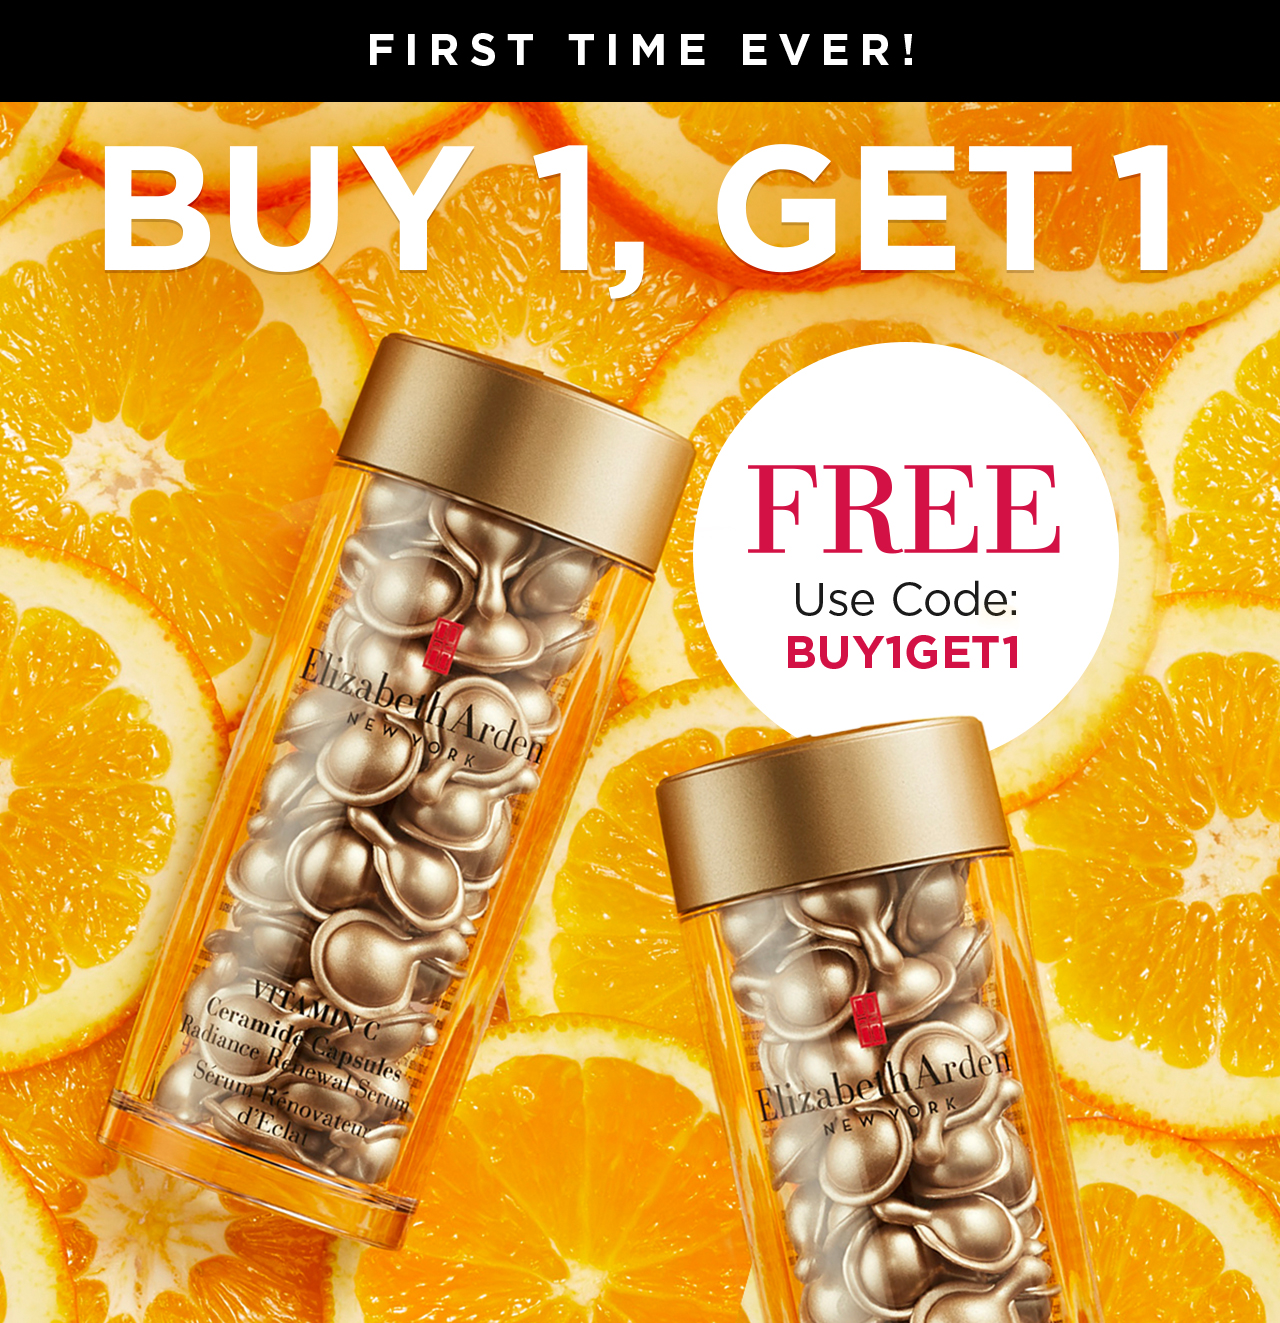 FIRST TIME EVER! BUY 1, GET 1 FREE Use Code: BUY1GET1